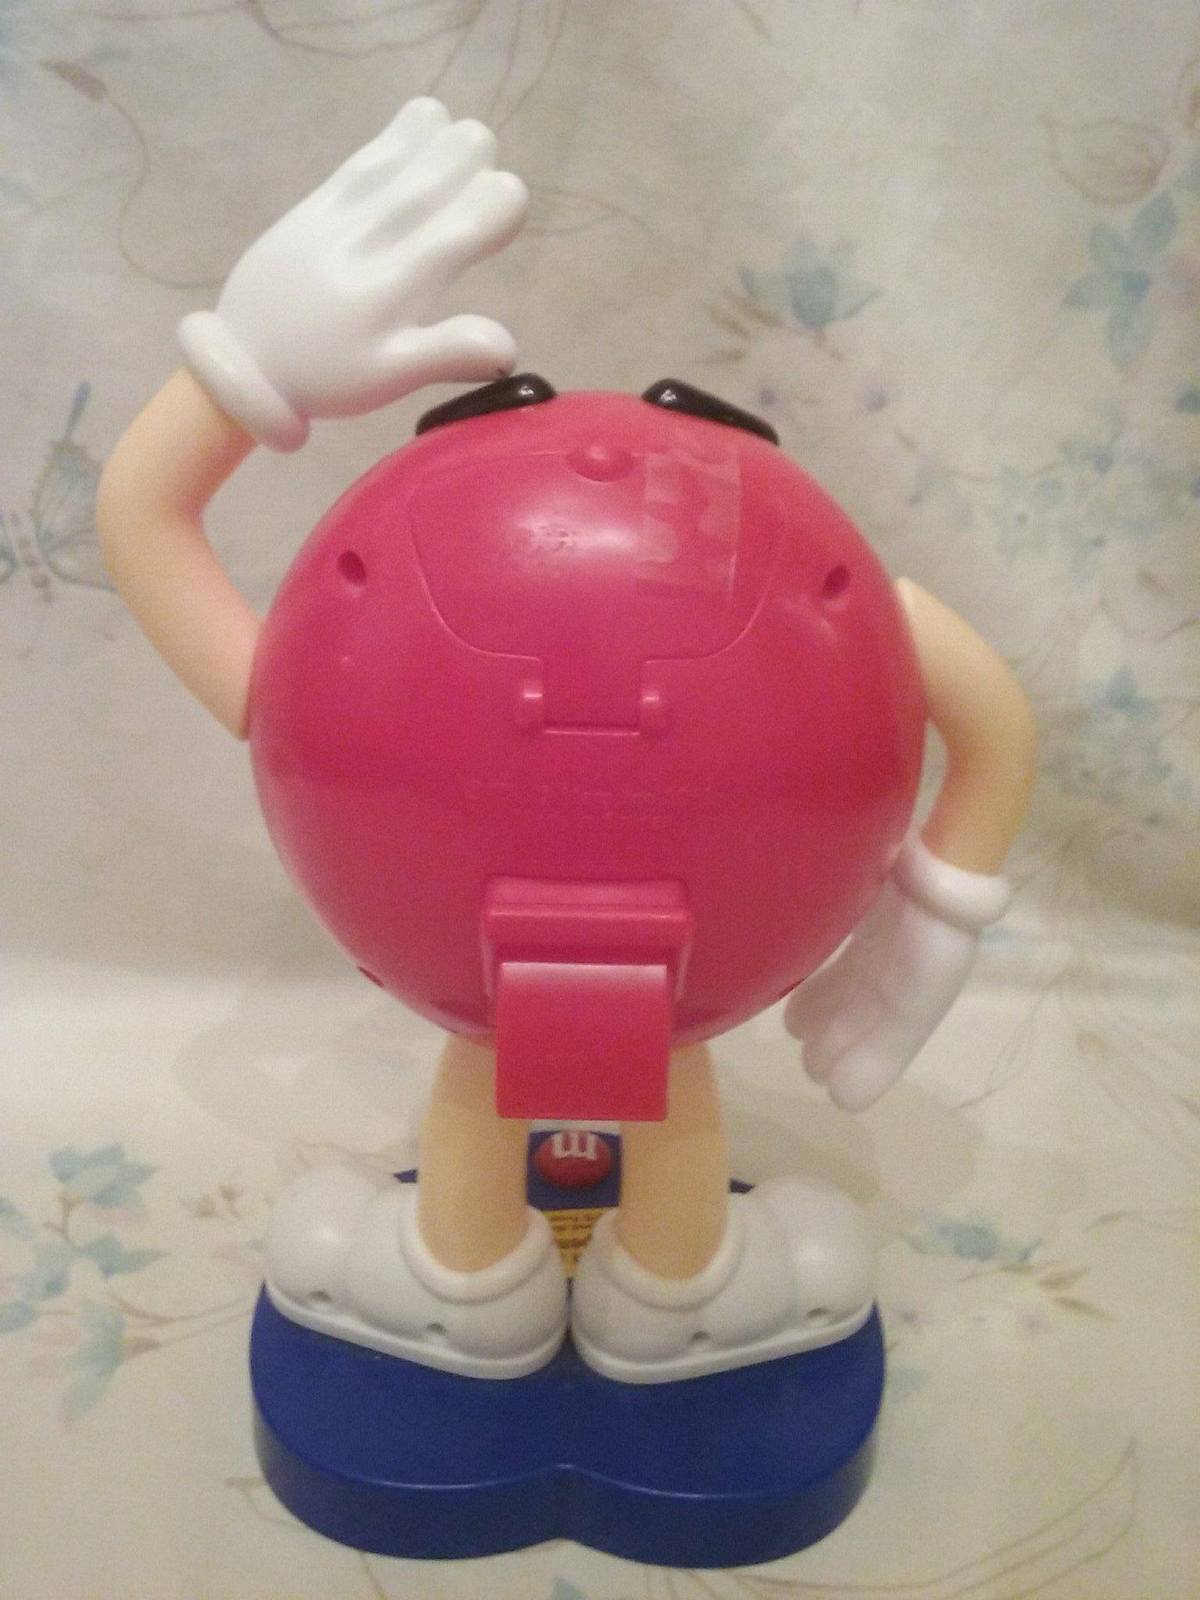 Red m&m Candy Hard Plastic 5.5" Figure With Rubber Arms